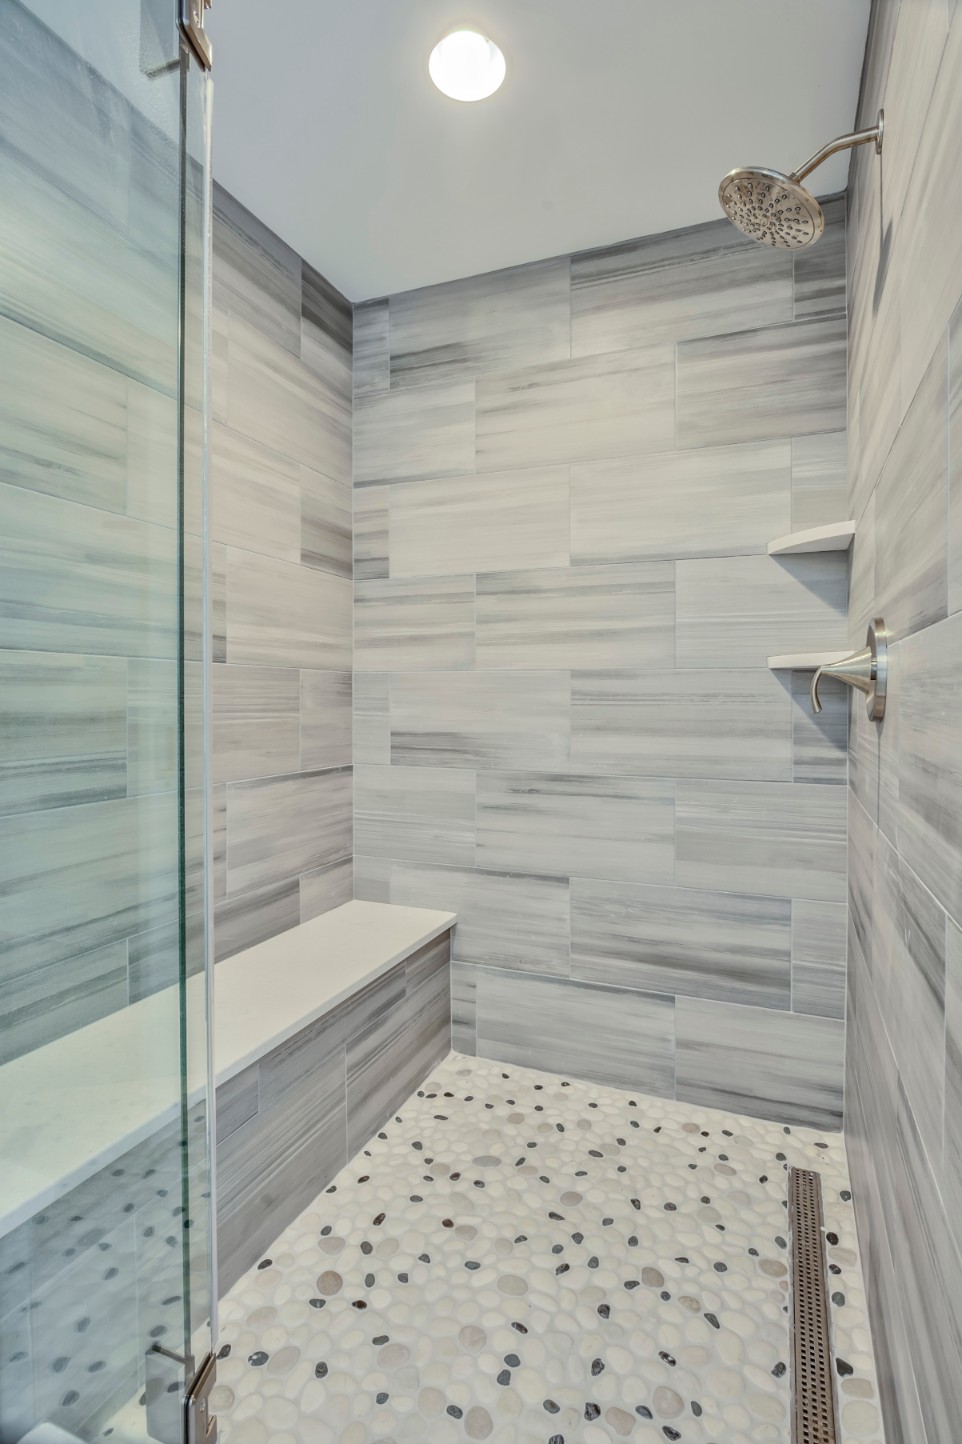 Canal Way Bathroom Remodel in Bethany Beach DE - Shower with Stone Mosaic Floor